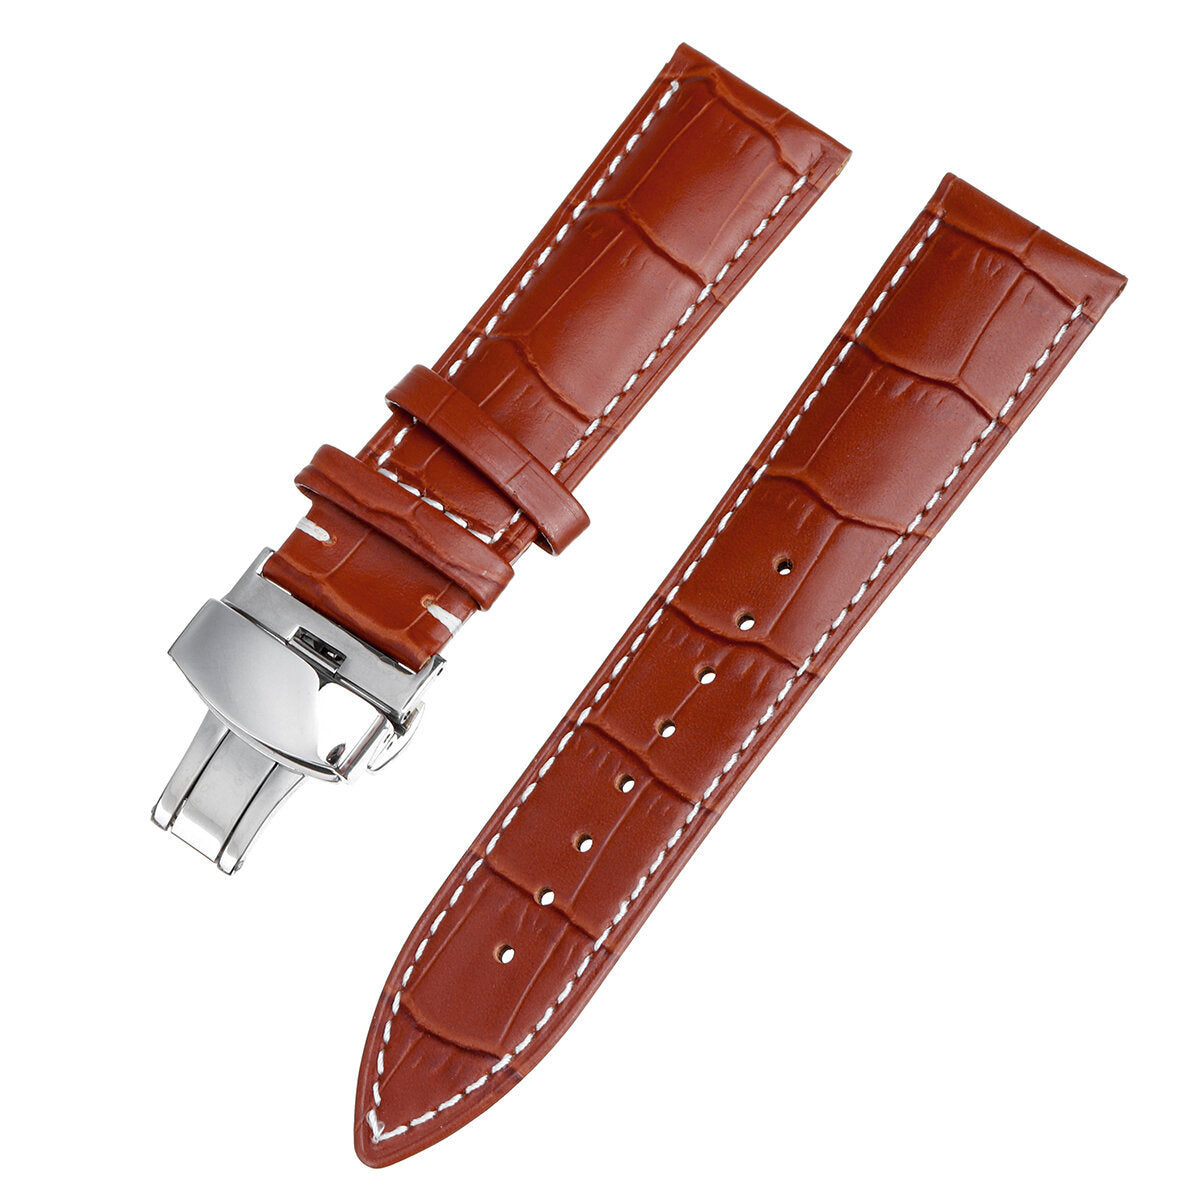 22mm Genuine Leather Watch Band Strap Kit Butterfly Deployment Clasp